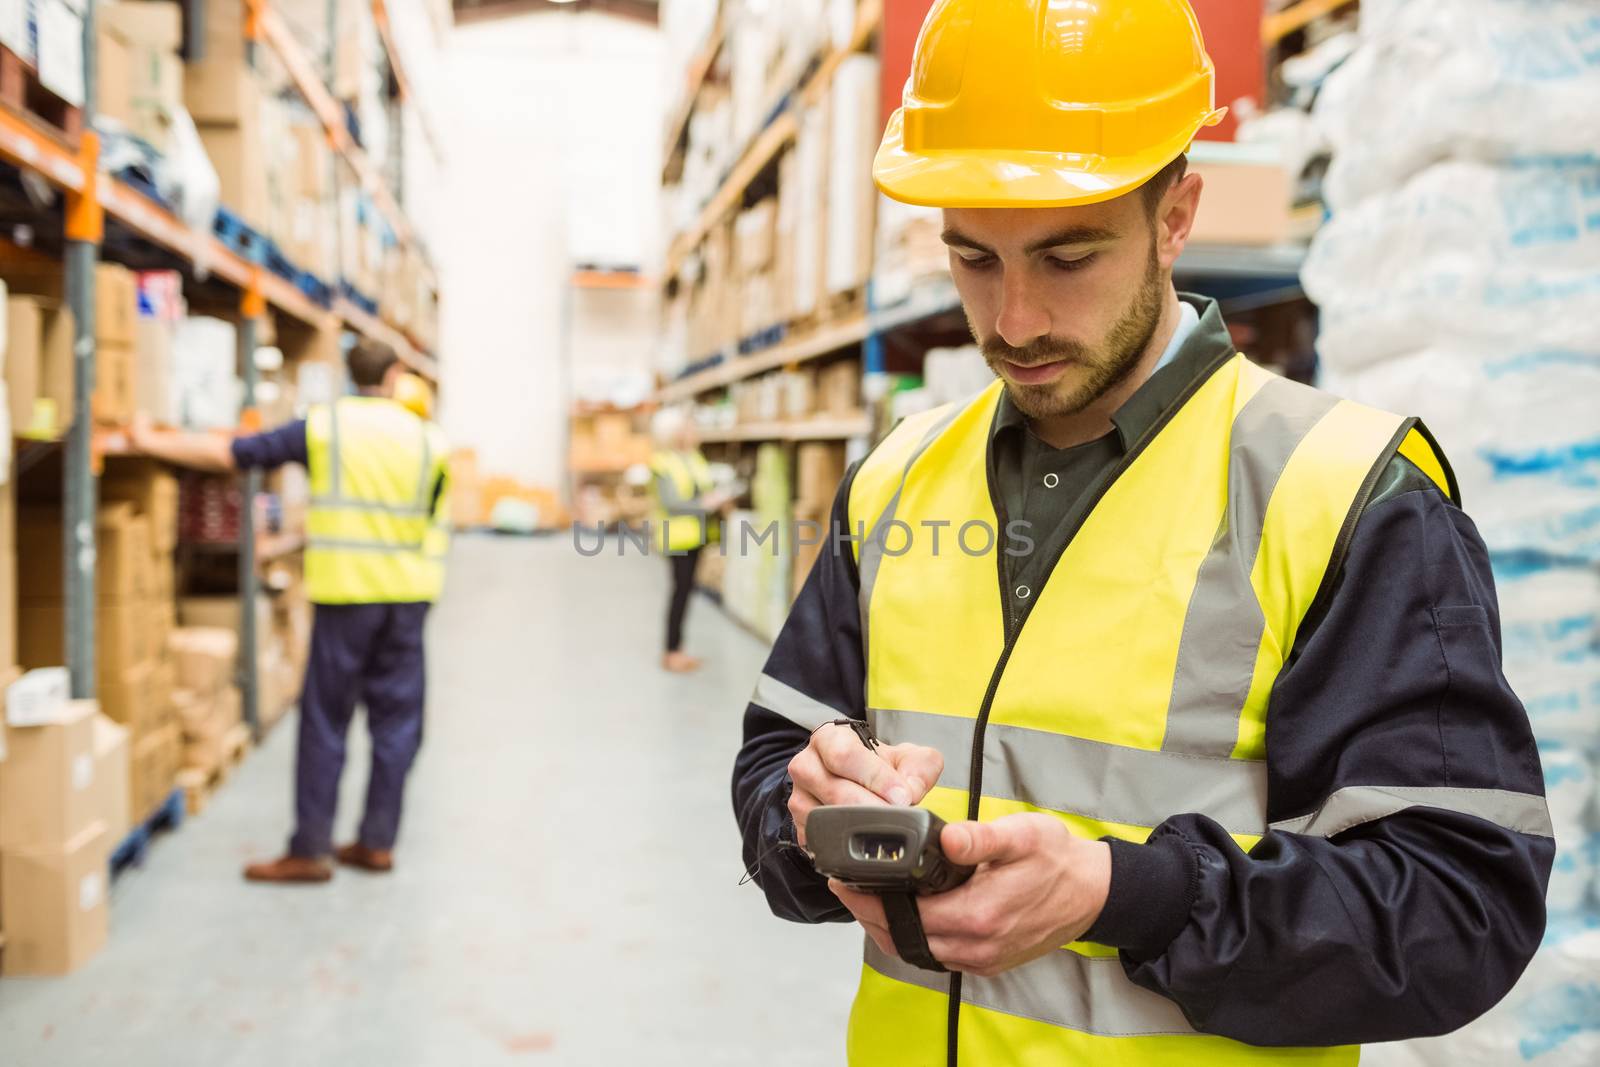 Focused worker wearing yellow vest using handheld in a large warehouse